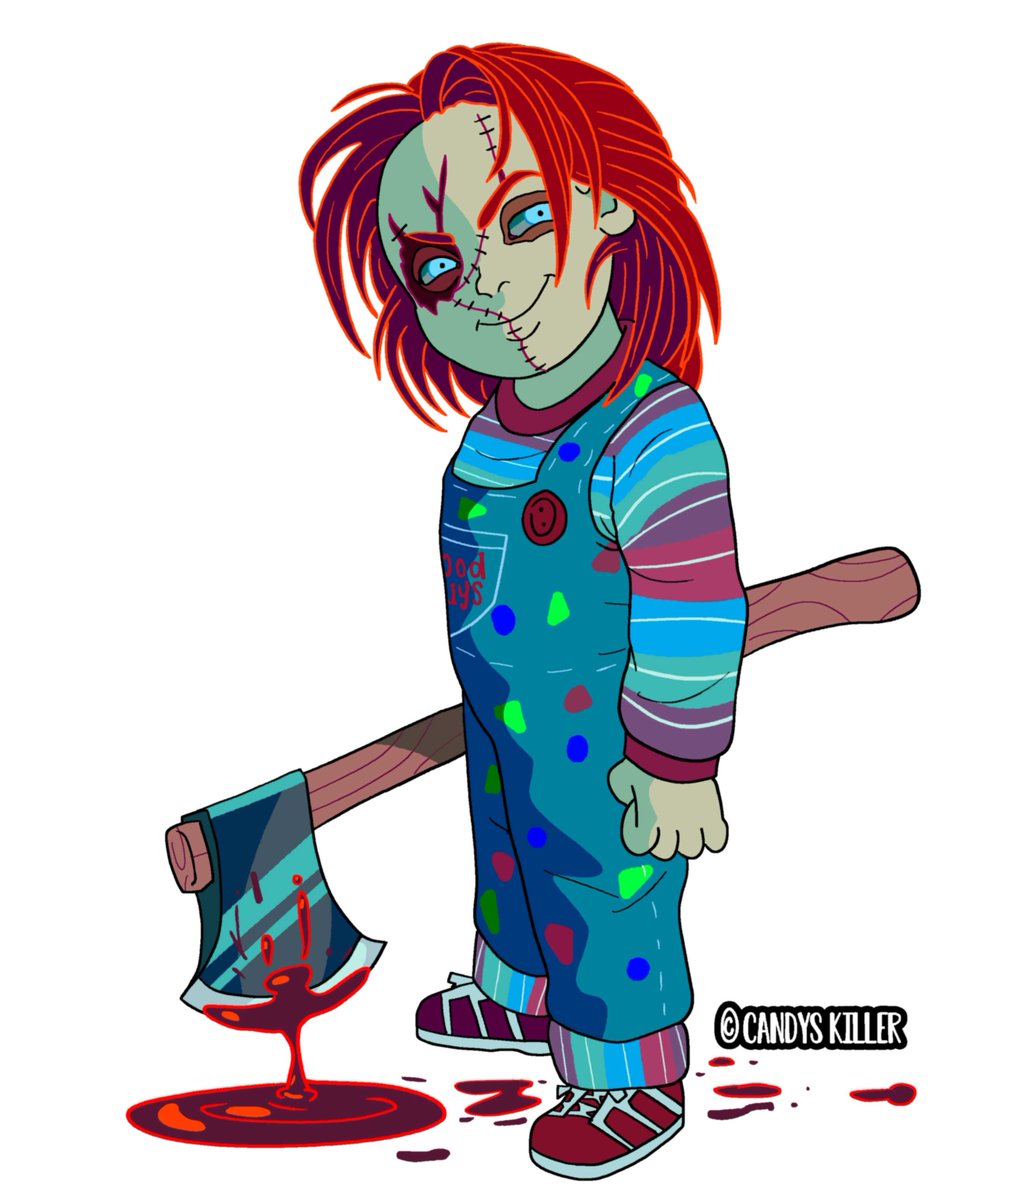 (Respost cause I really love his look on Curse of Chucky) A cursed boii coming through your dash....
Commissions open!.
#chucky #chuckyseries #chuckytvseries #charlesleeray #curseofchucky #candyskiller #goodguydoll #childsplay